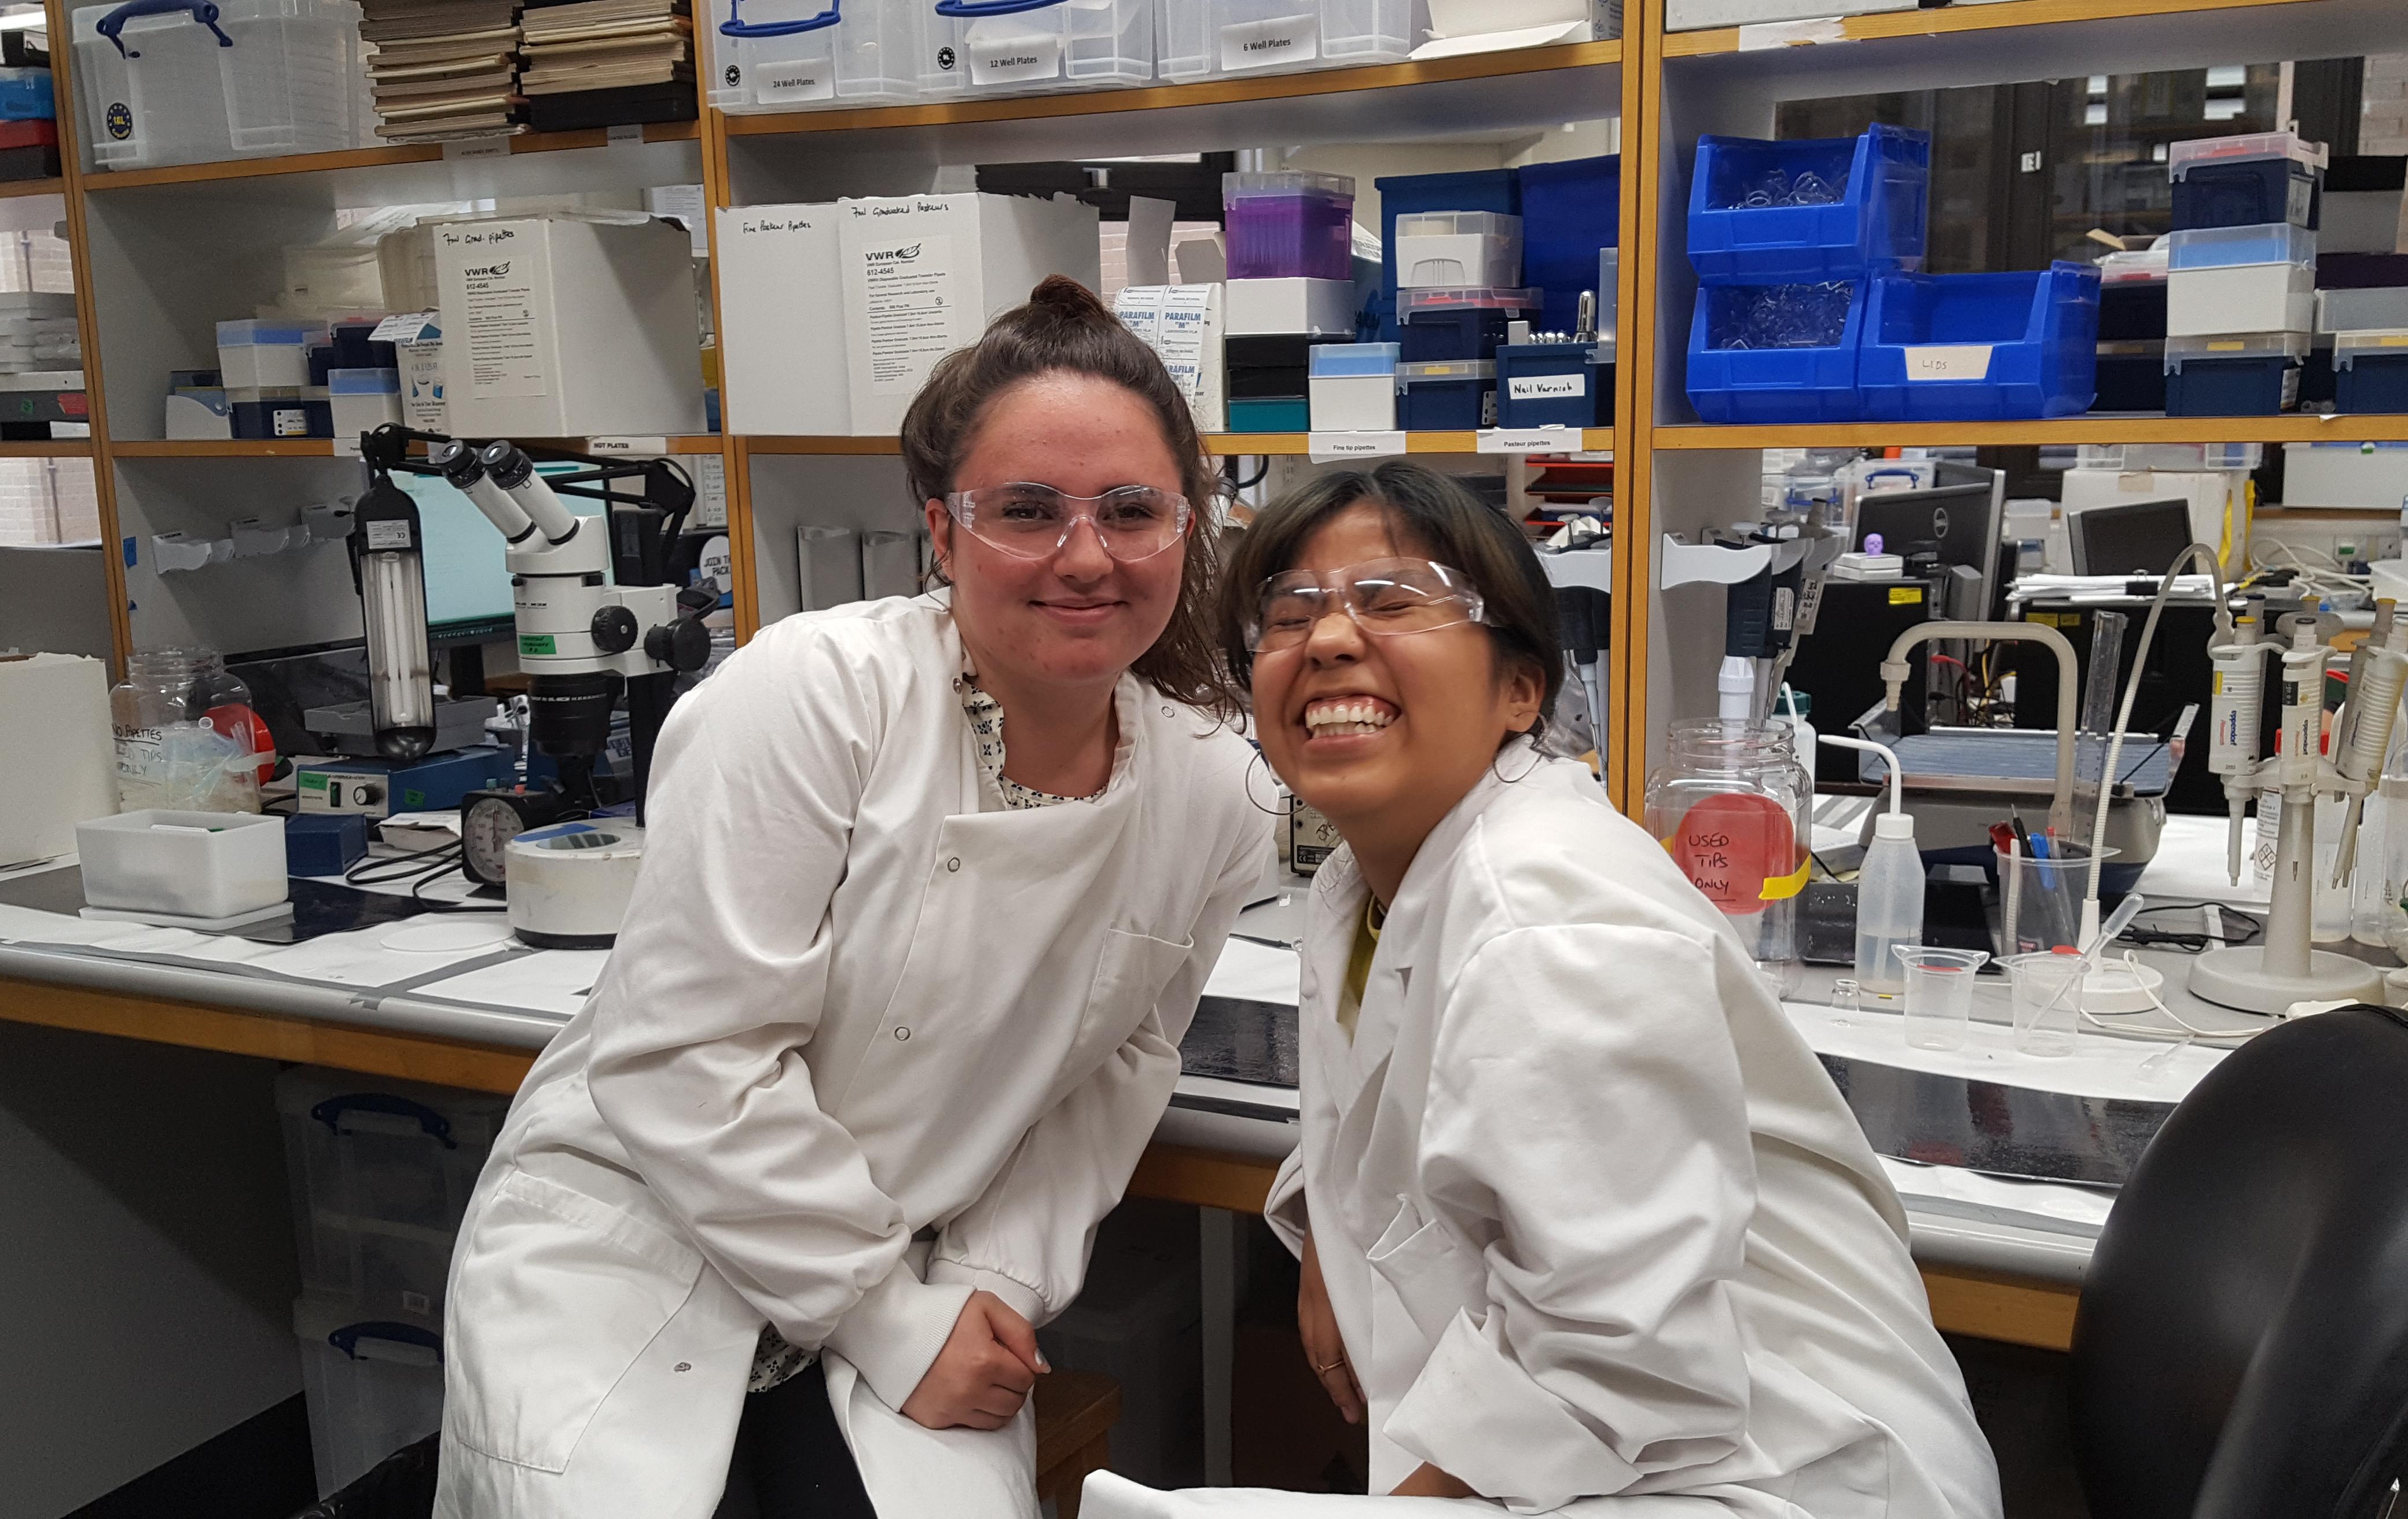 Happy in2scienceUK students Chloe and Kim at the end of their work-experience placements at the MRC BNDU.